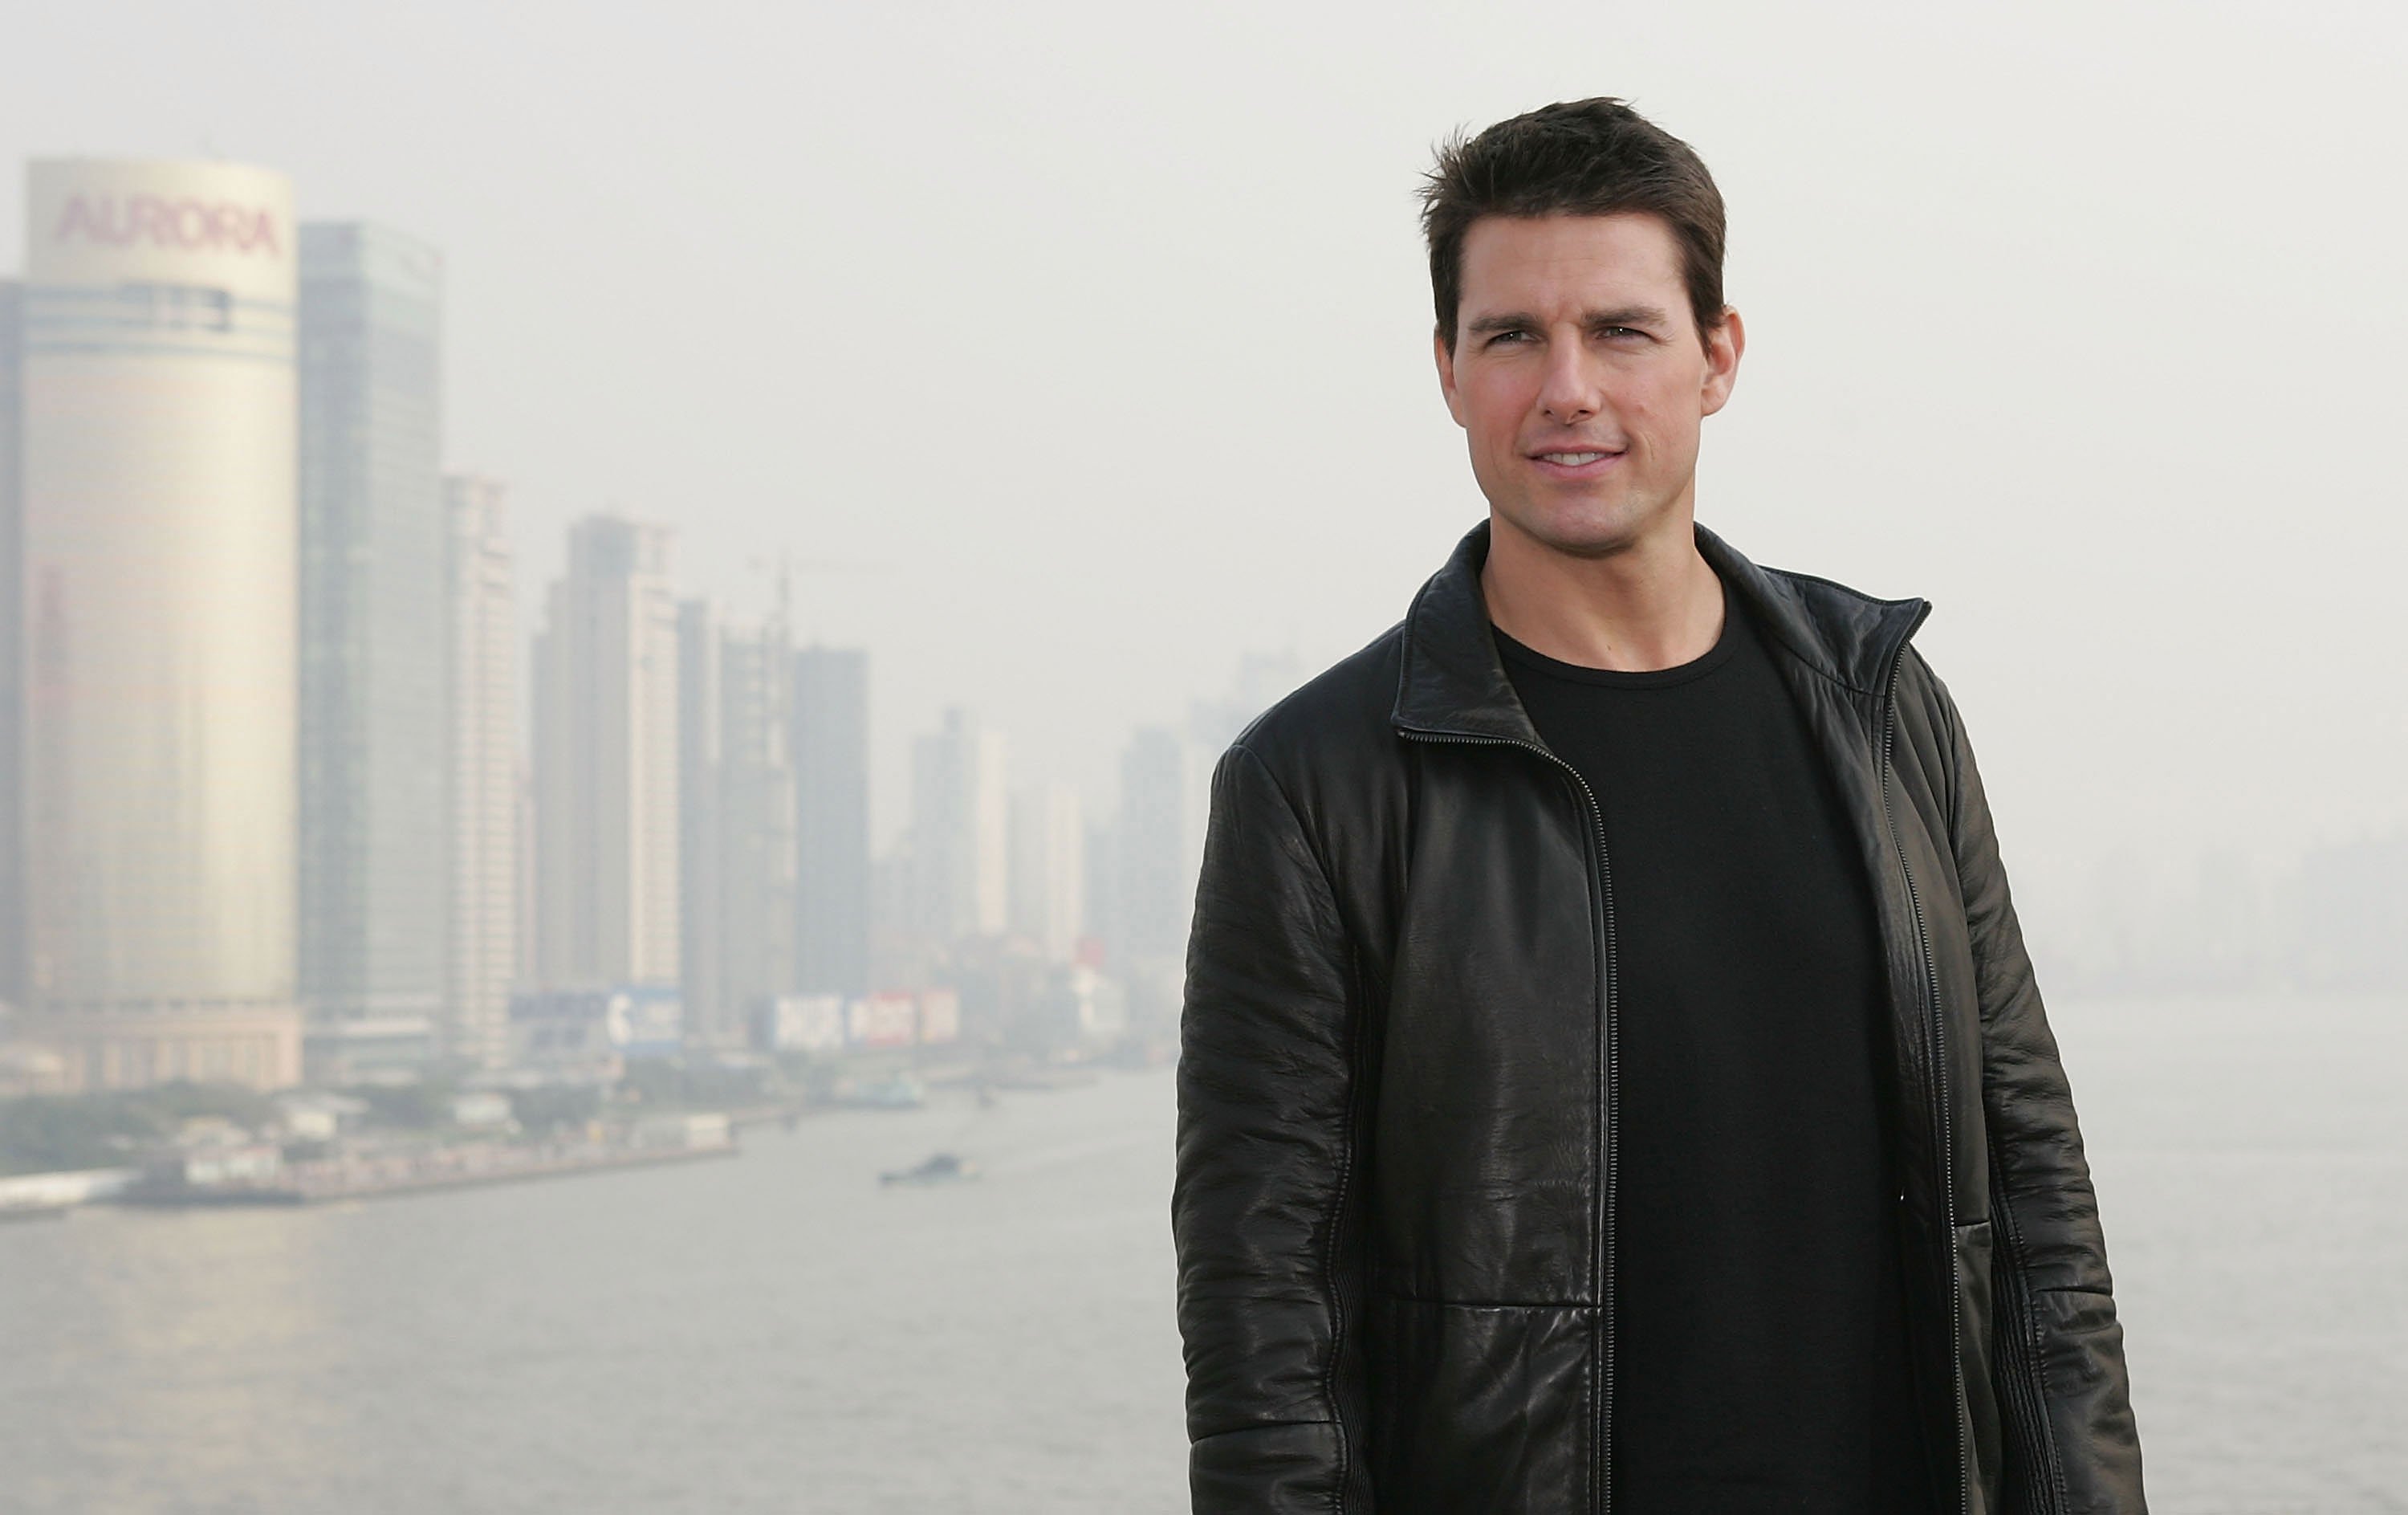 Tom Cruise promoting "Mission Impossible III" atop Shanghai's historic Bund 18 building on November 30, 2005 | Photo: GettyImages